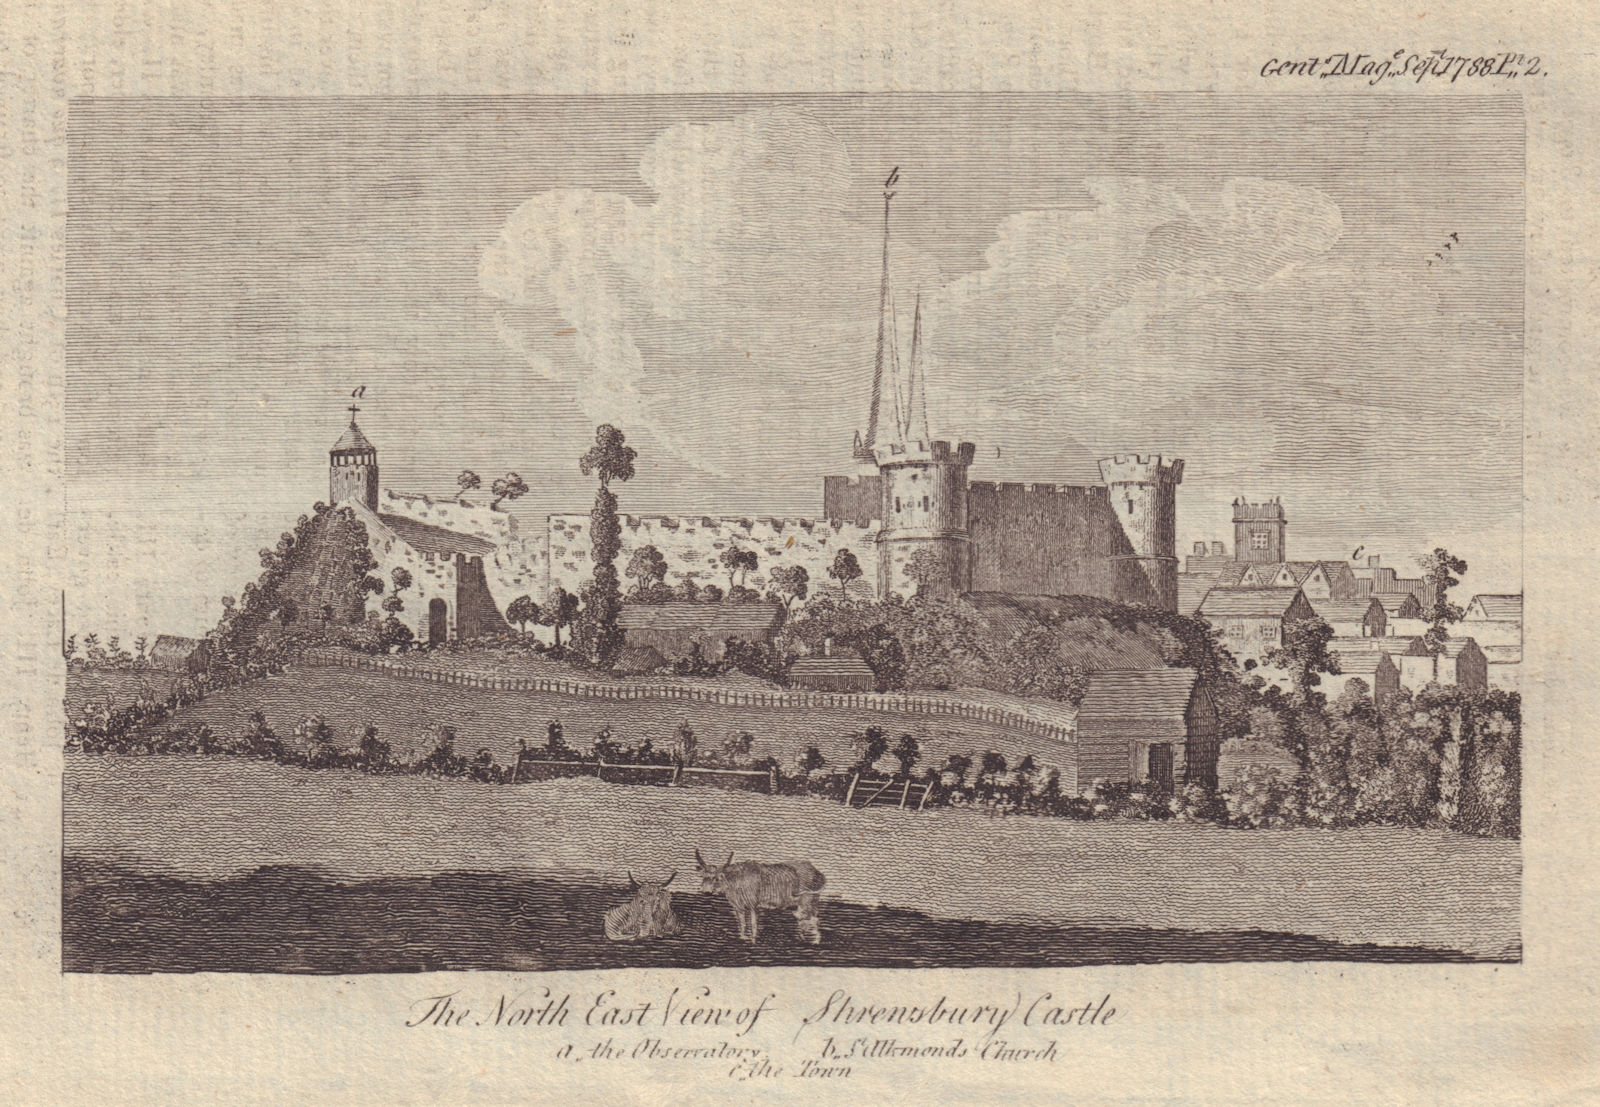 Associate Product The North East View of Shrewsbury Castle, Shropshire. GENTS MAG 1788 old print